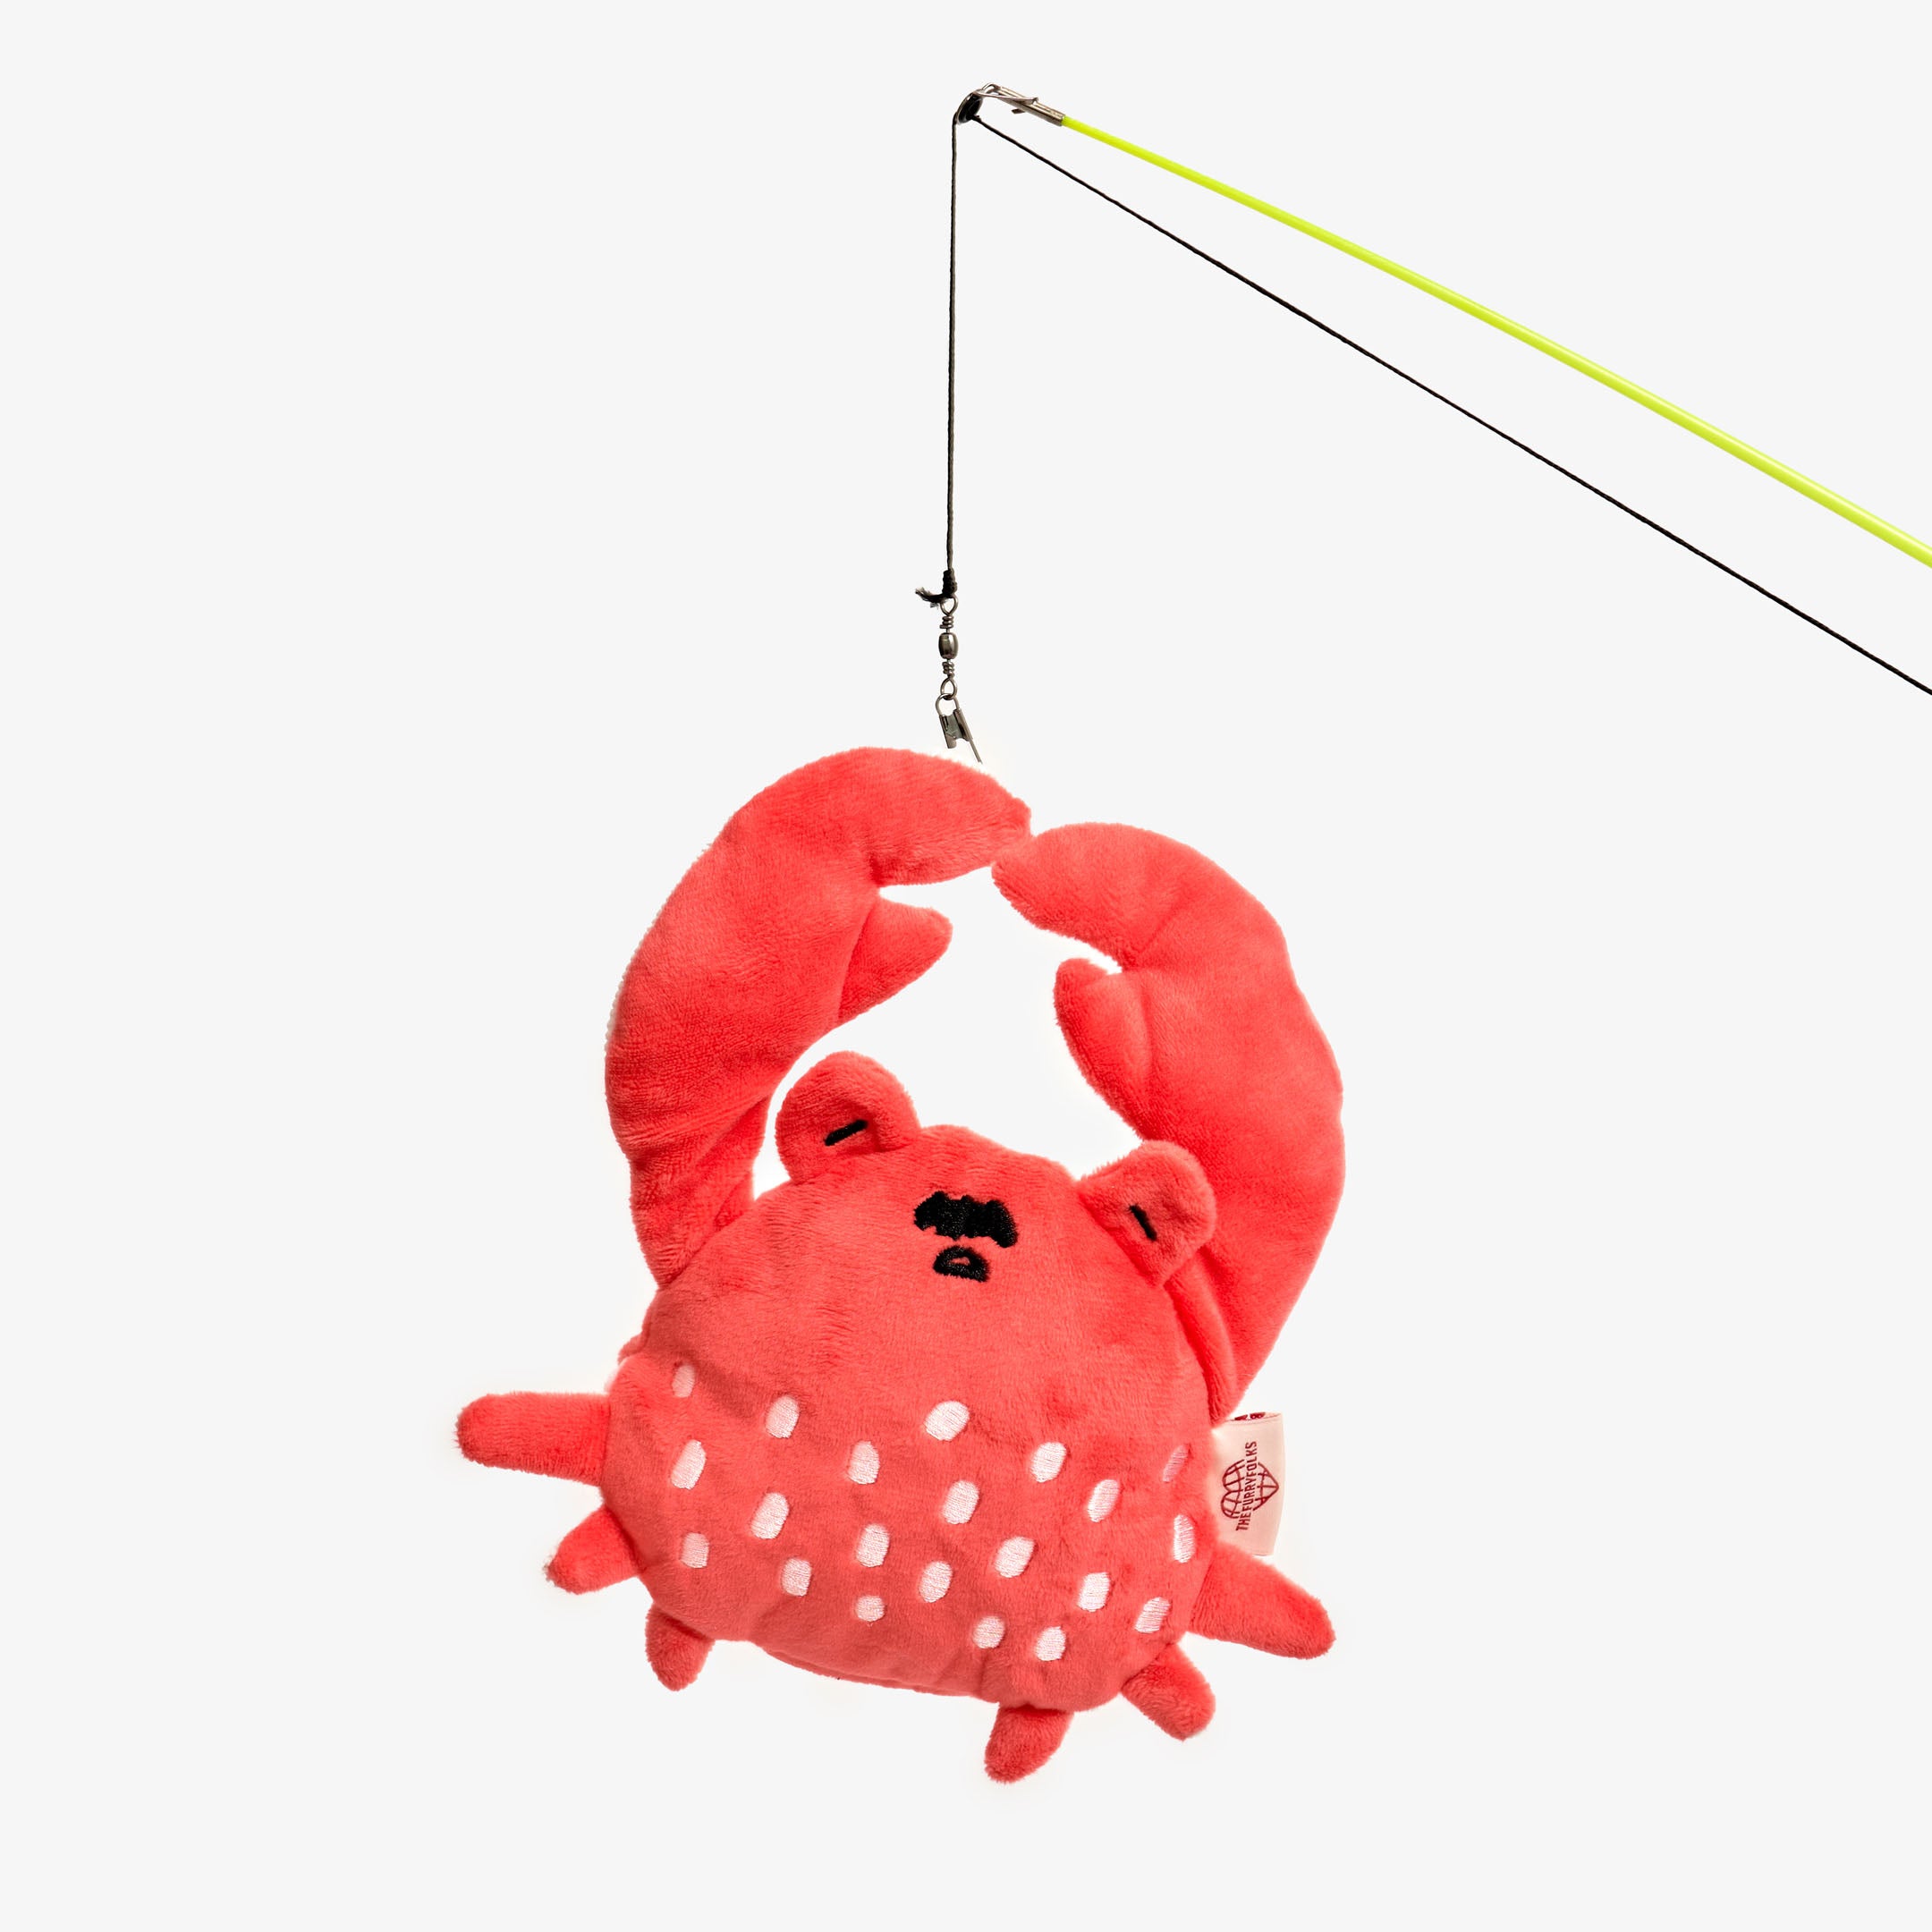 The image features a plush toy resembling a stylized red crab, complete with eyes and spots on its body, suspended from a fishing rod line. The rod, with its lime green handle extending out of the frame, and the way the toy is dangling from the line, suggest that this might be a pet toy designed to simulate fishing, likely for a cat. The playful design and bright color are characteristic of pet toys that are made to attract and engage a pet's attention through movement and visual interest.